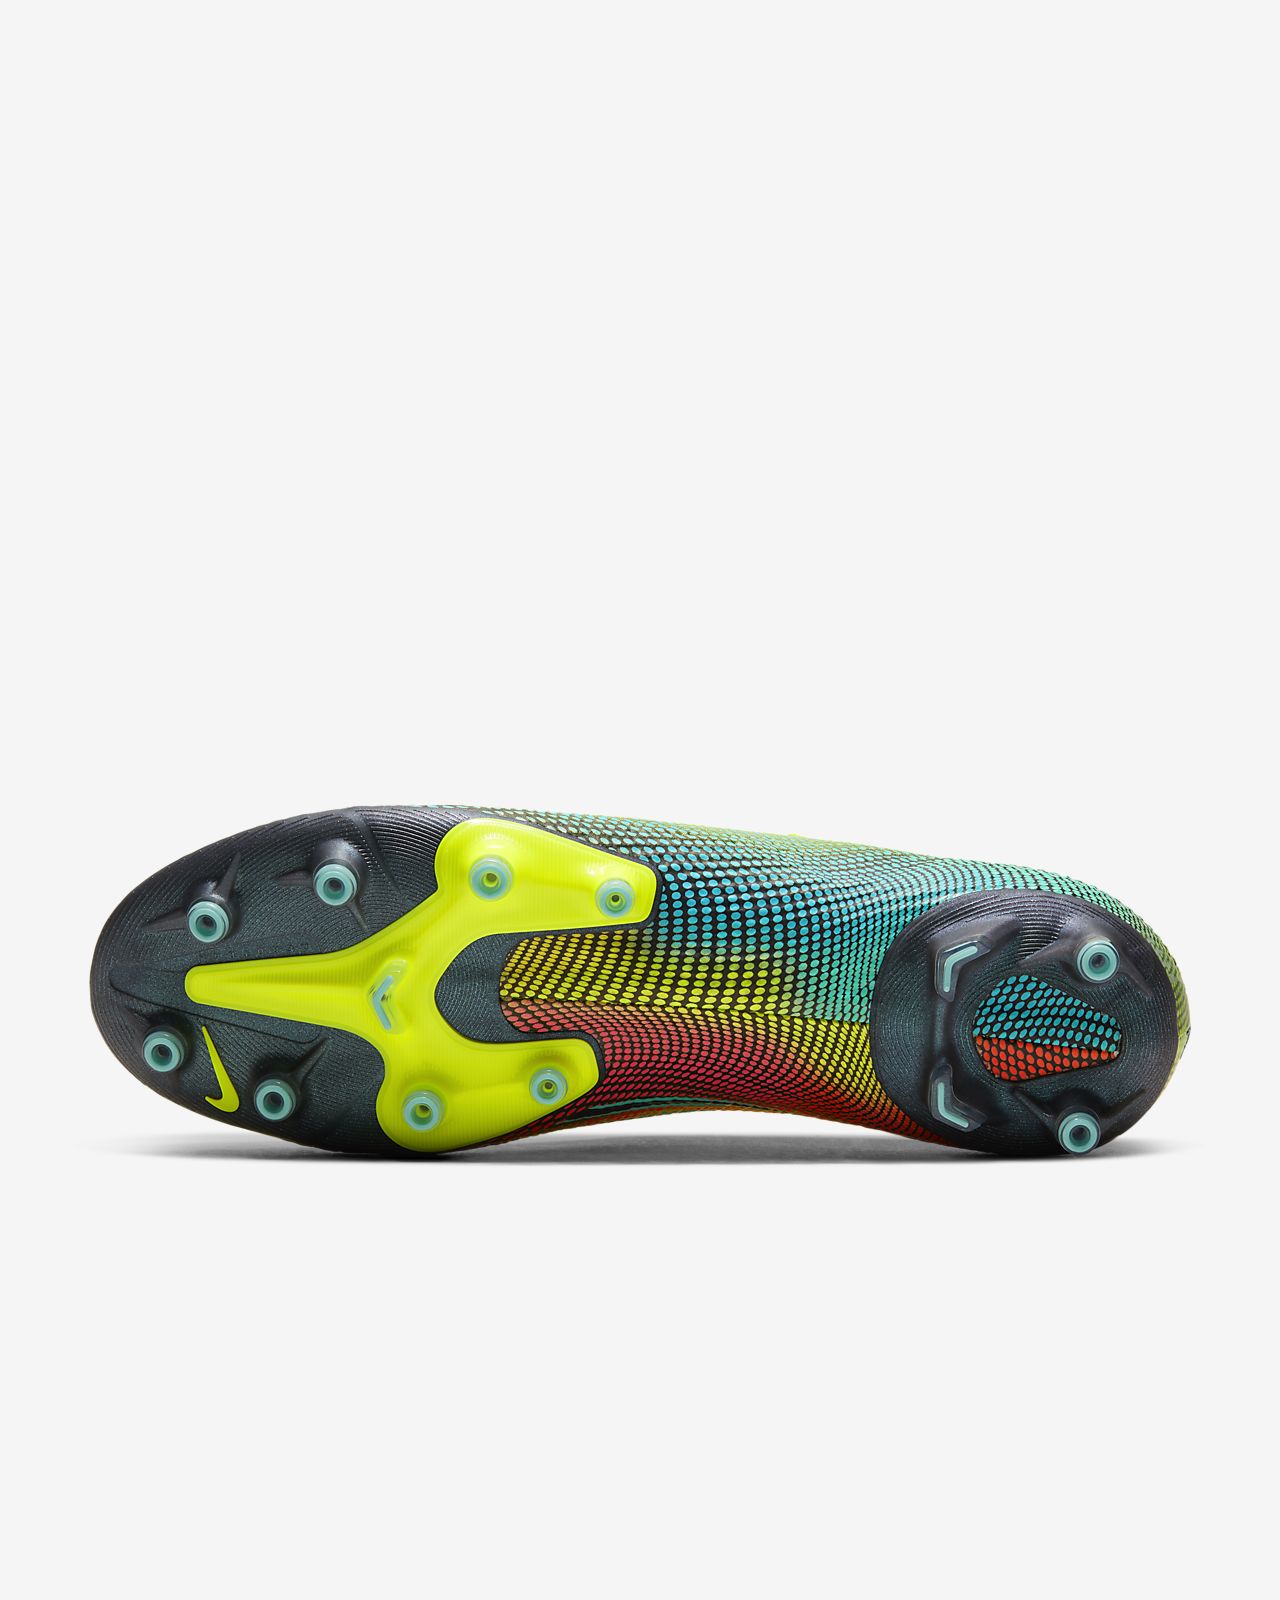 Find the best price on Nike Mercurial Vapor 13 Club MDS MG FG Jr.